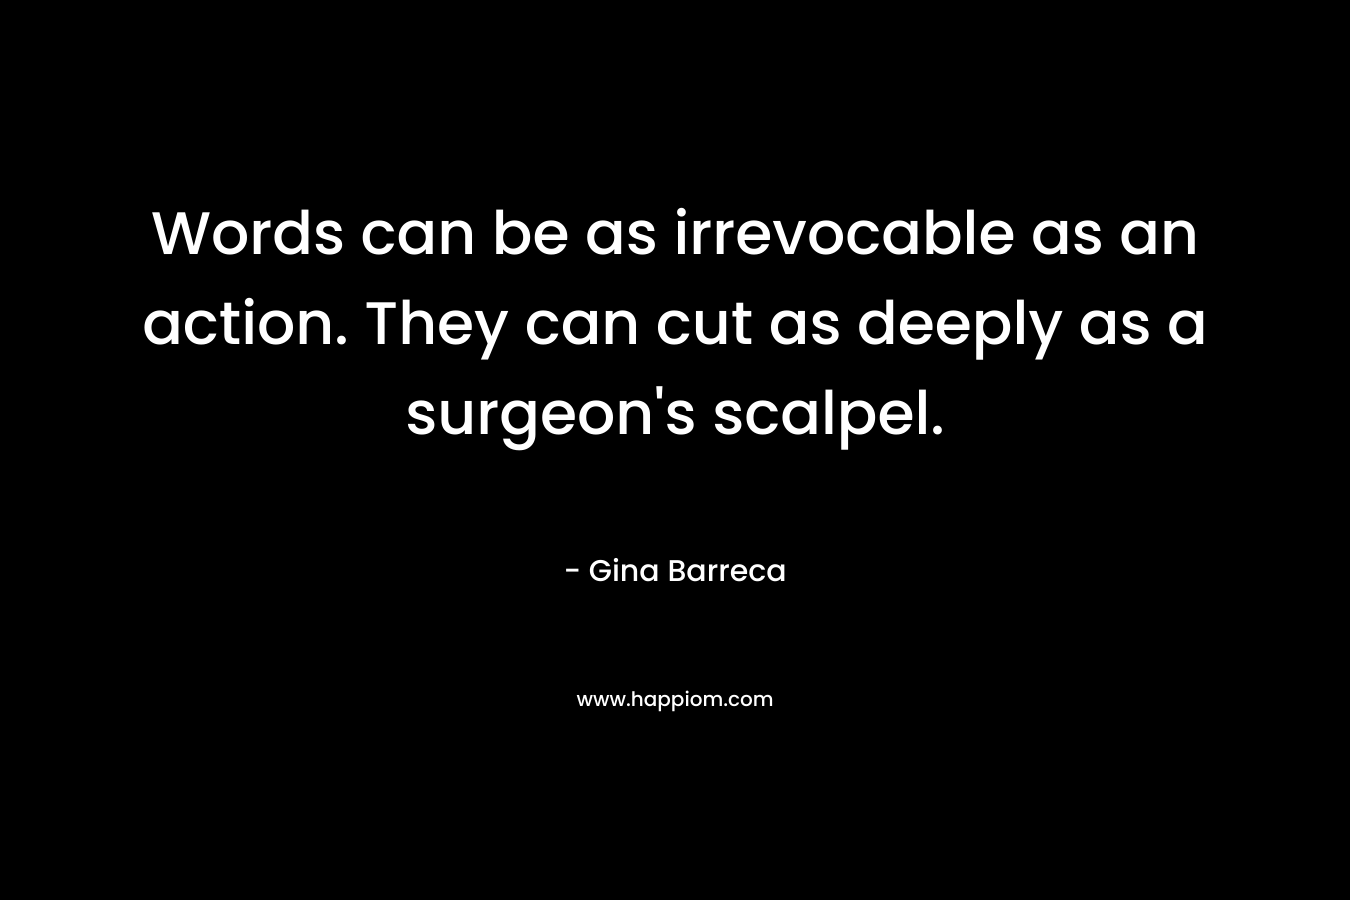 Words can be as irrevocable as an action. They can cut as deeply as a surgeon's scalpel.